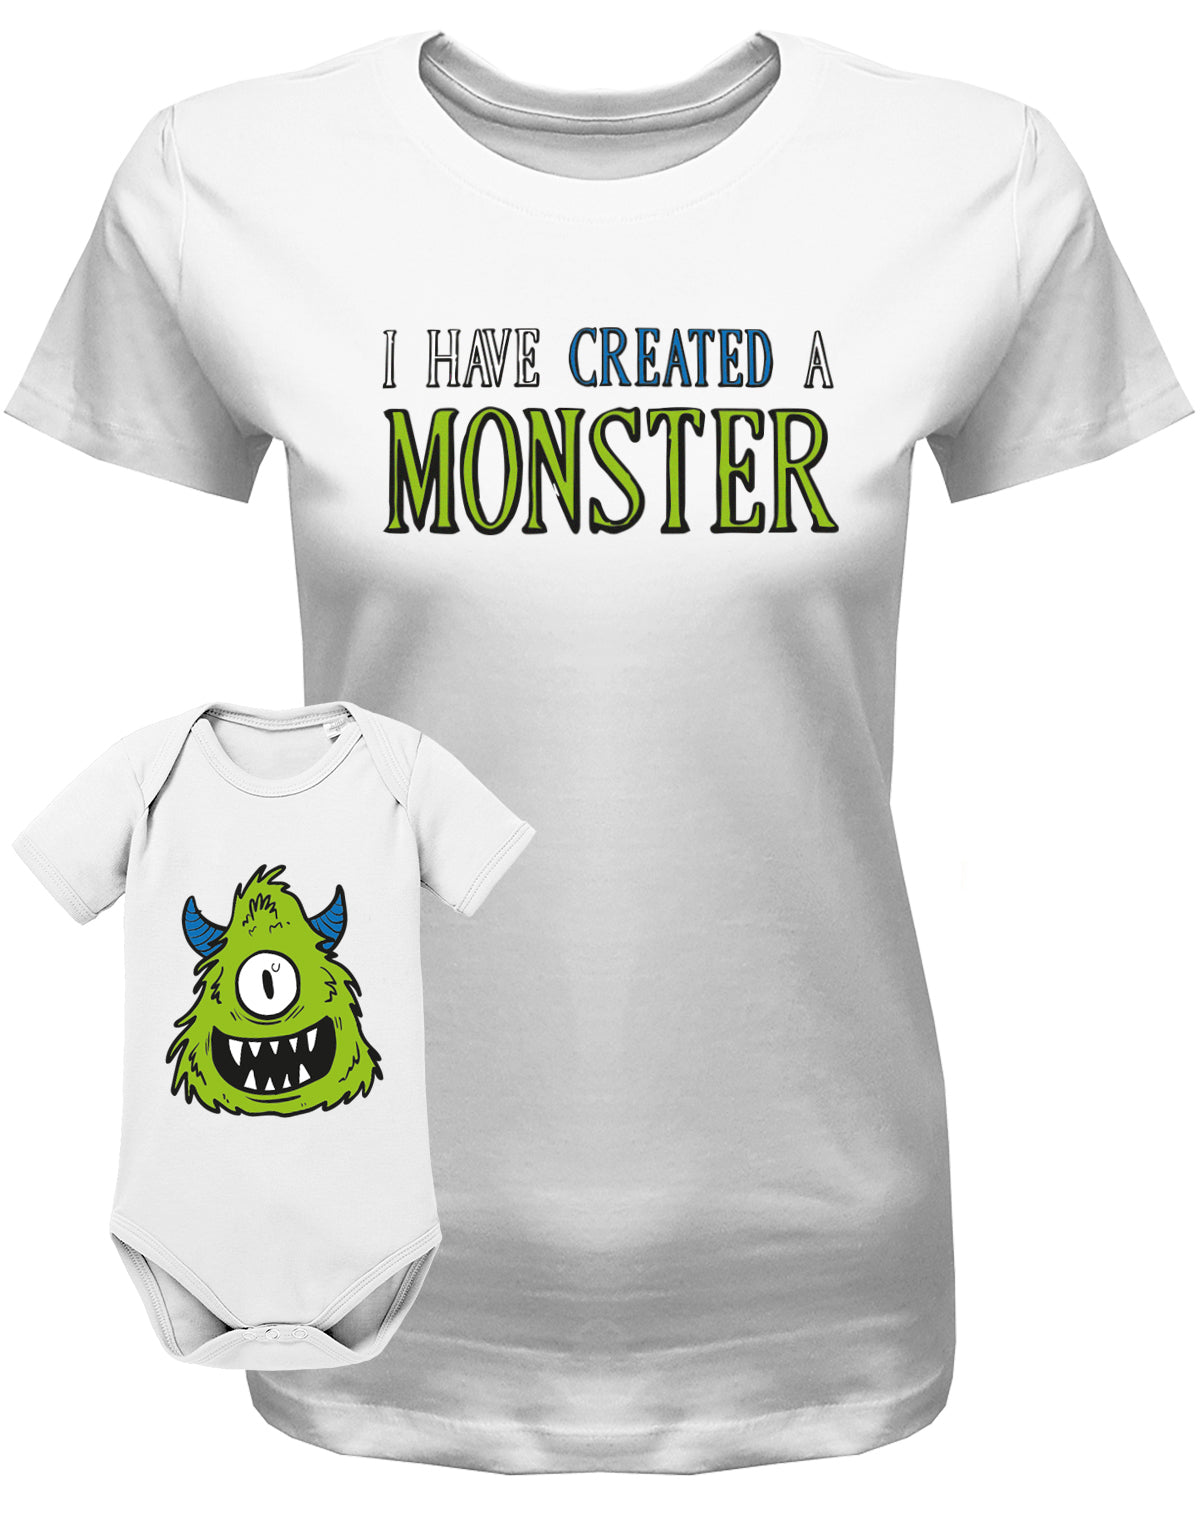 I have created a Monster - Monster - Partnerlook - Papa T-Shirt - Baby Body - Set Mama Kind Weiss